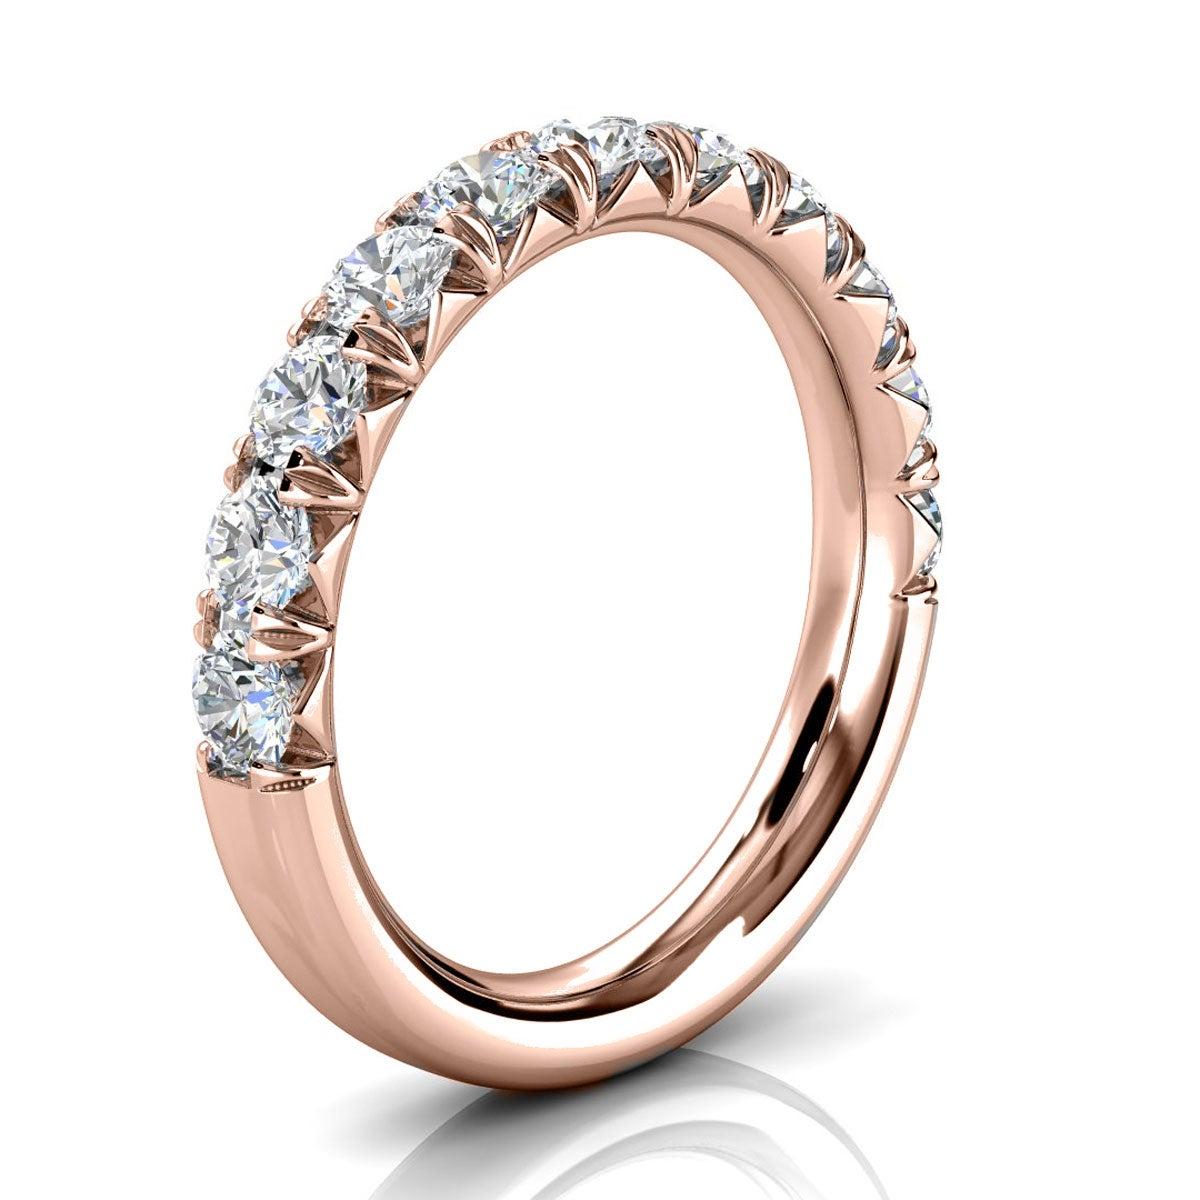 For Sale:  14k Rose Gold Voyage French Pave Diamond Ring '1 Ct. tw' 2